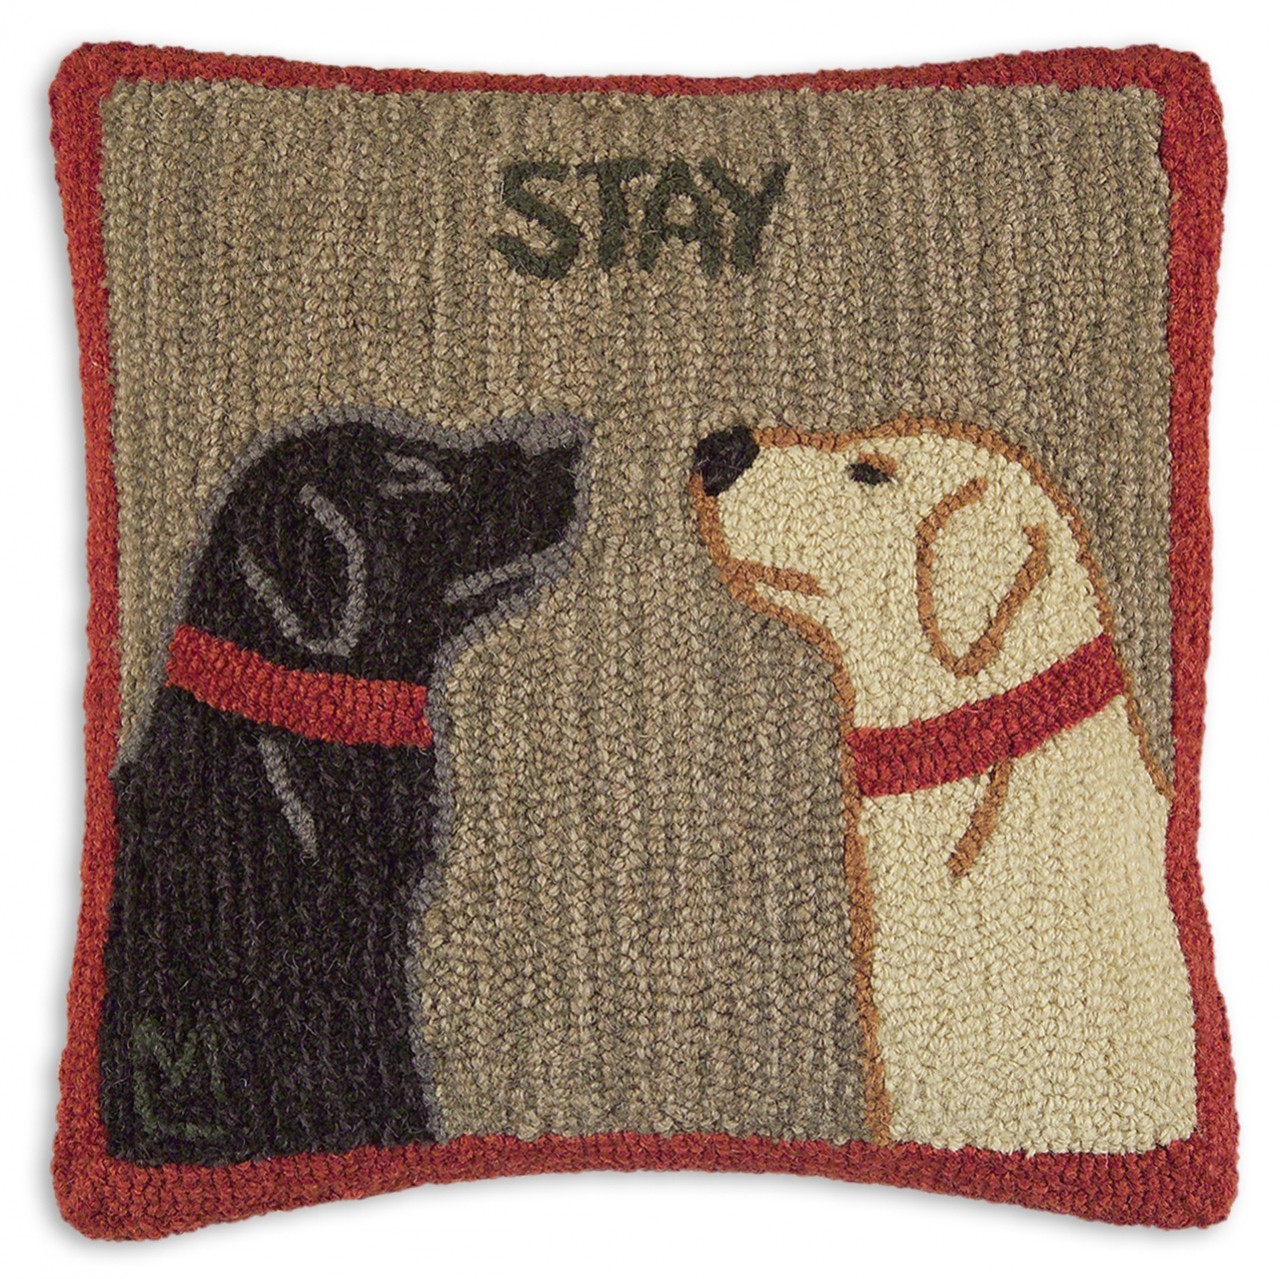 Stay There 18" Wool Hooked Pillow